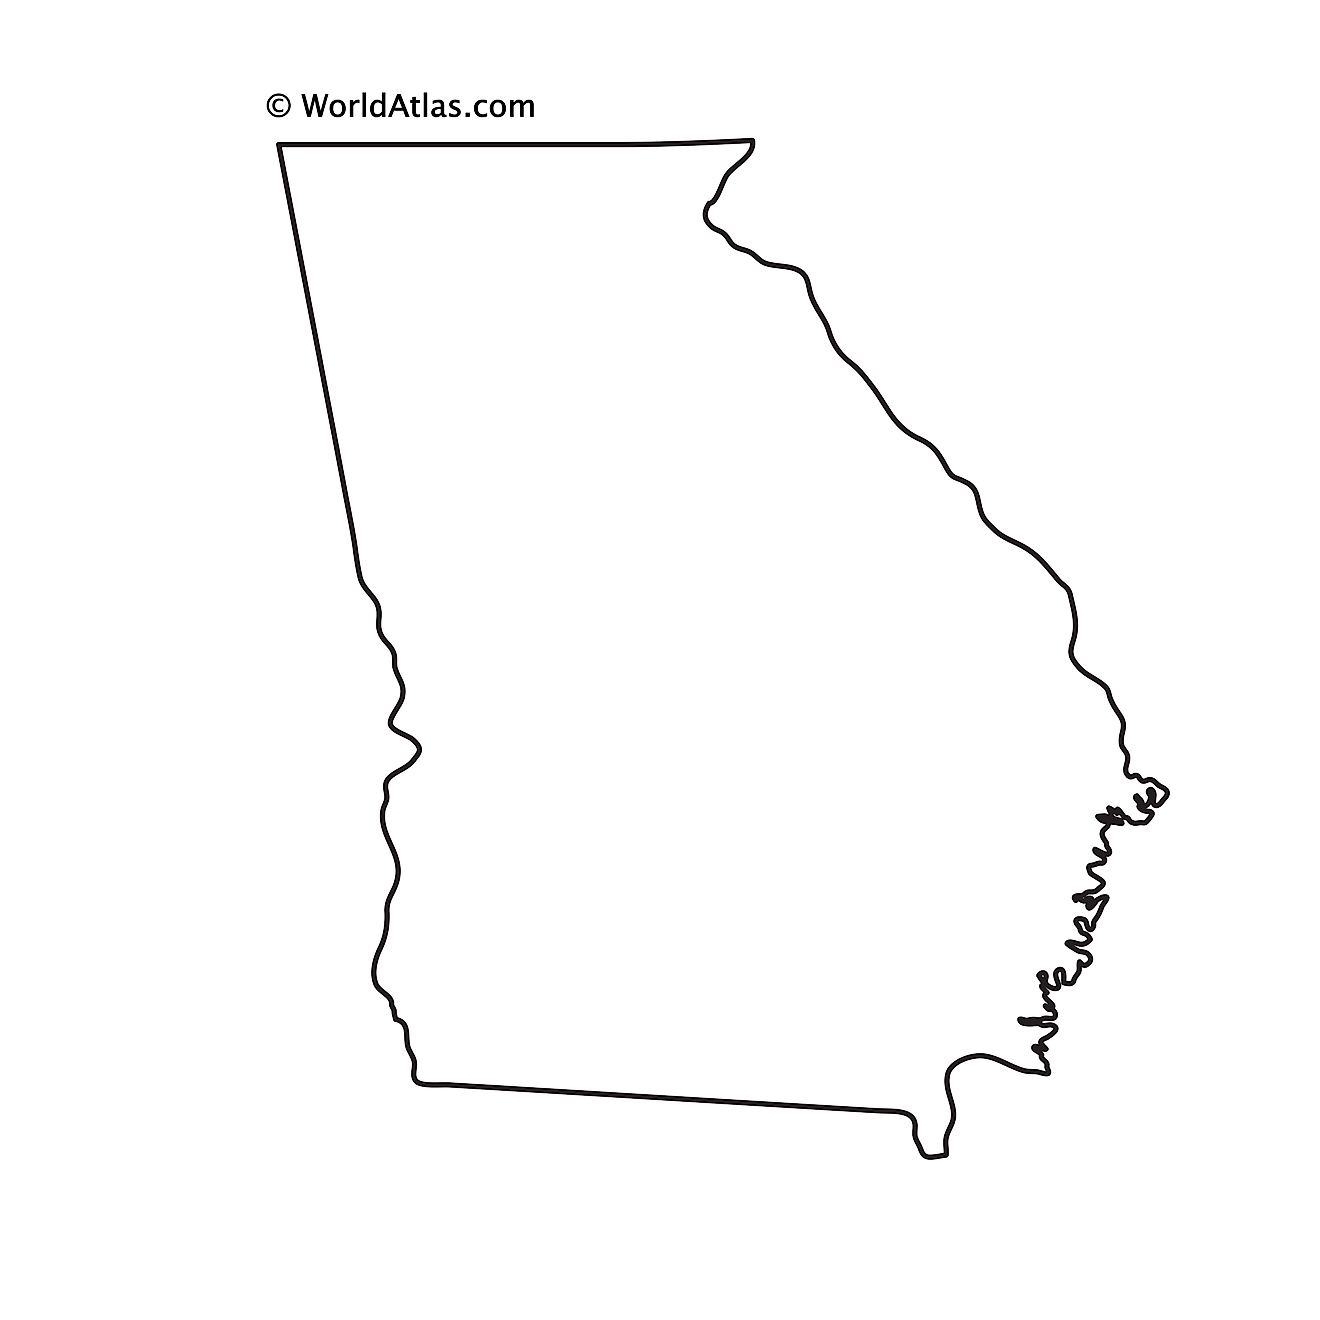 Blank Outline Map of Georgia